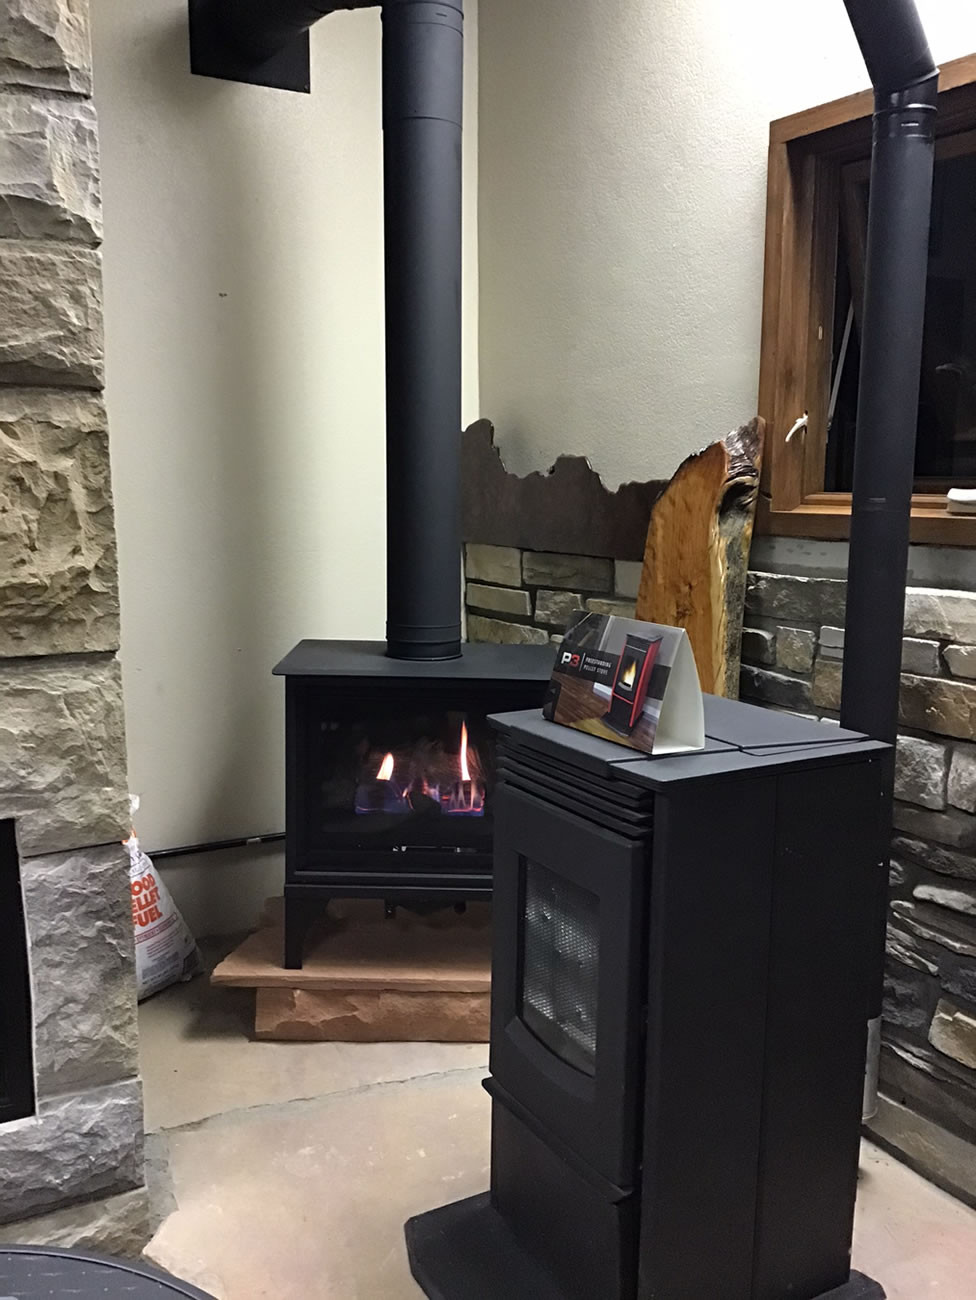 Flagstaff Gas Fireplaces, Flagstaff Gas Stoves, Flagstaff Gas Grills Sales and Installs